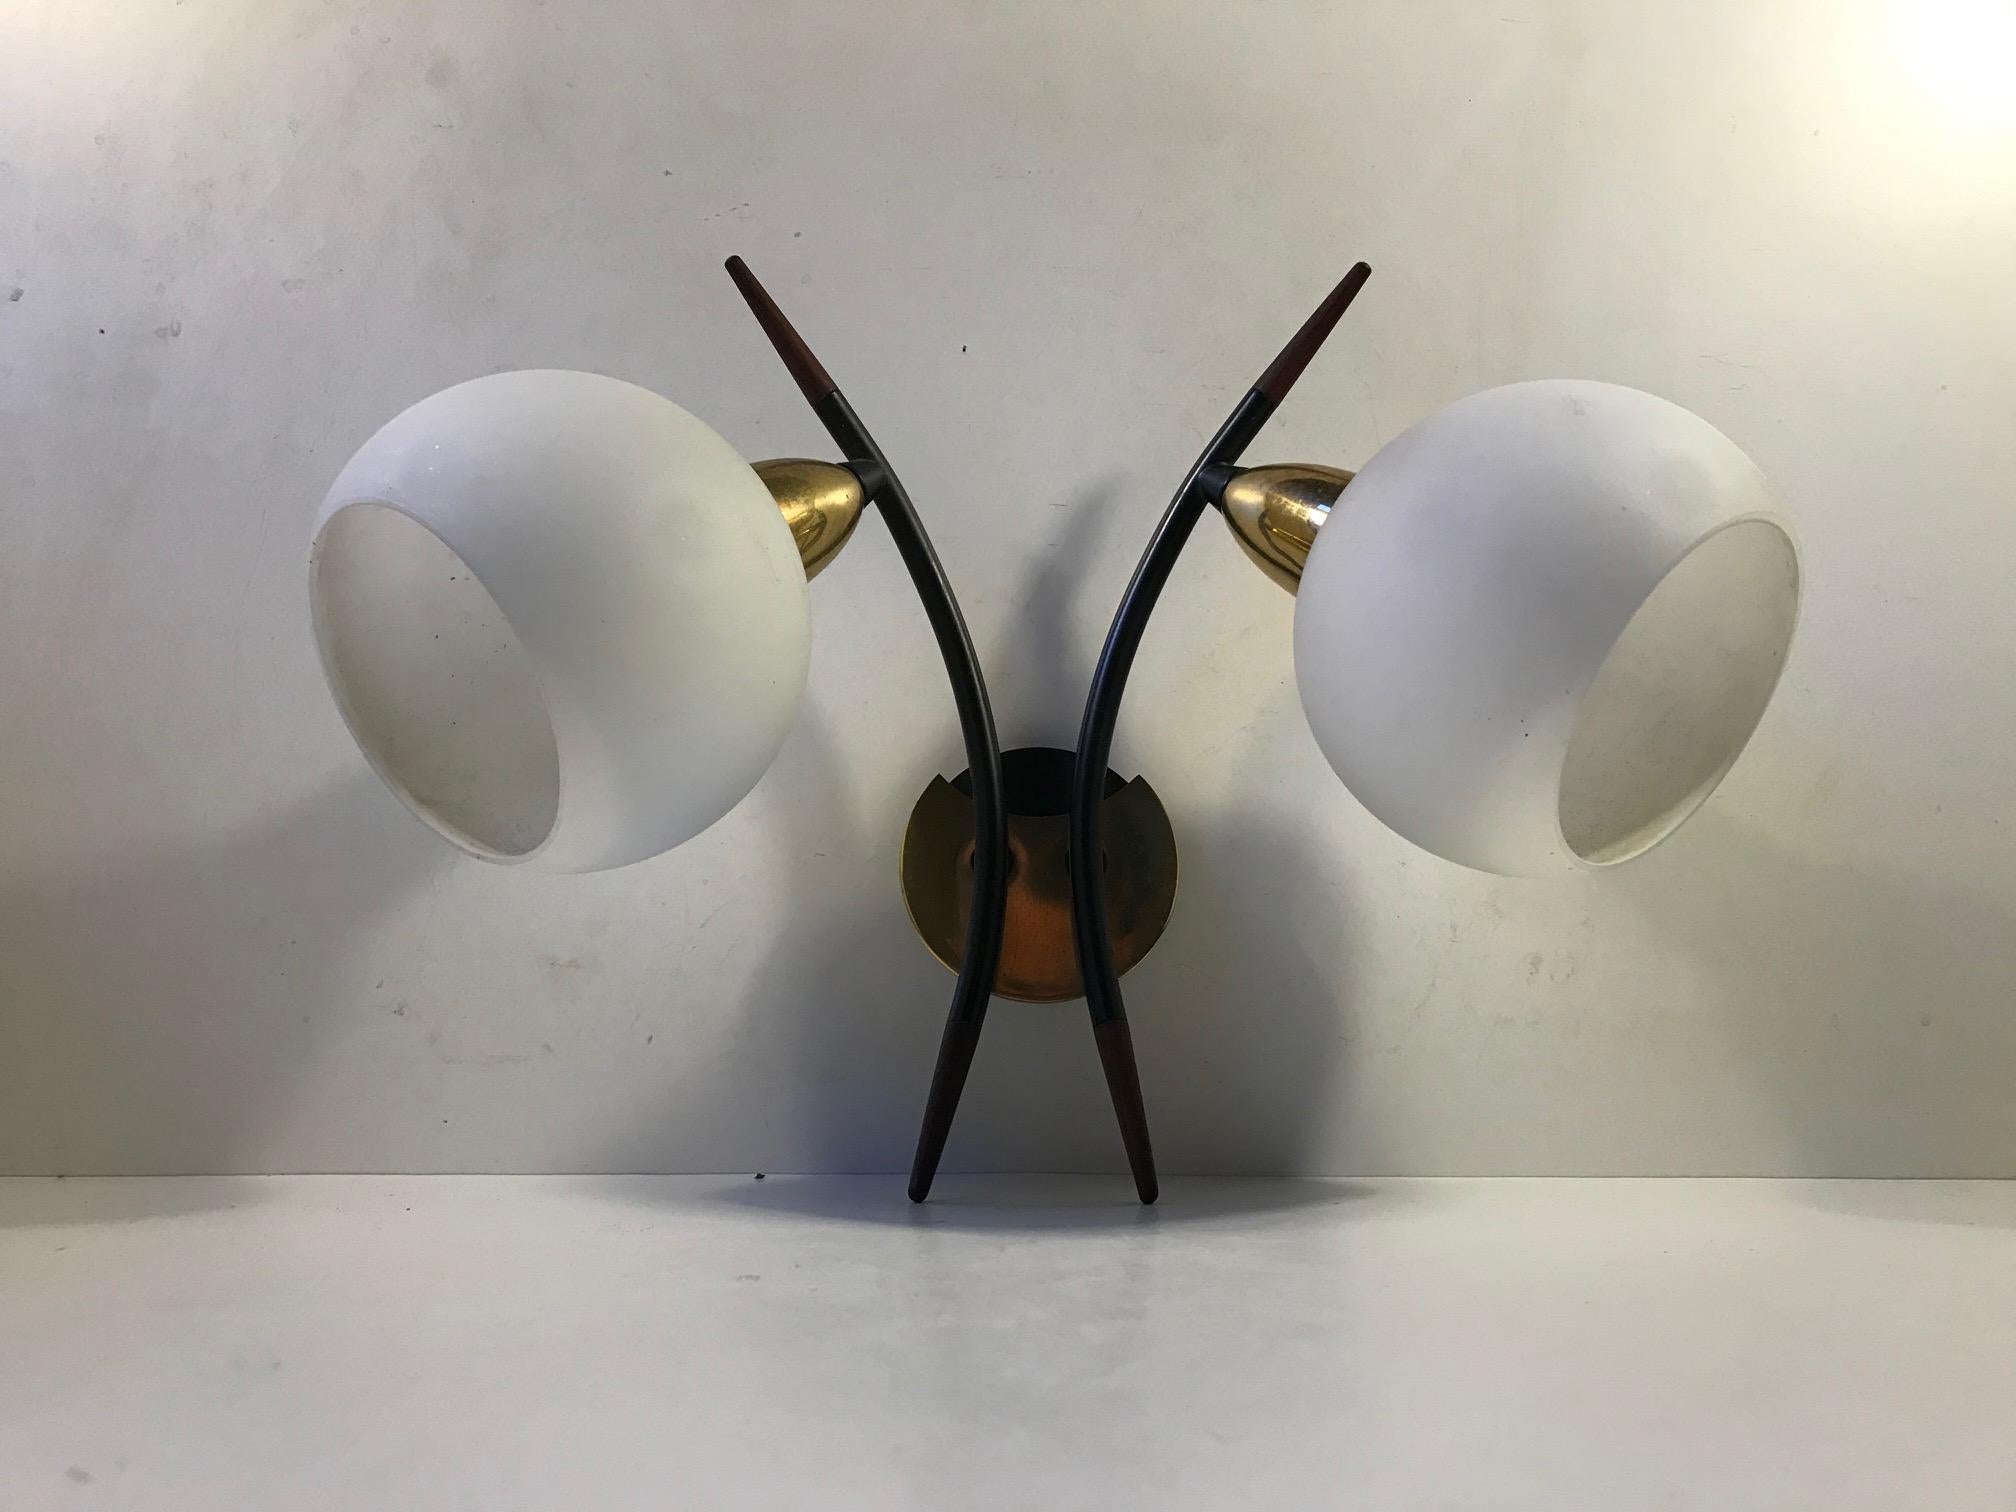 Twin sconce designed in a style reminiscent of Stilnovo and manufactured in the 1950s by anonymous Italian maker or designer. It is made from brass, black powder-coated steel and matte white opaline glass. The teak accents to the arching black arms